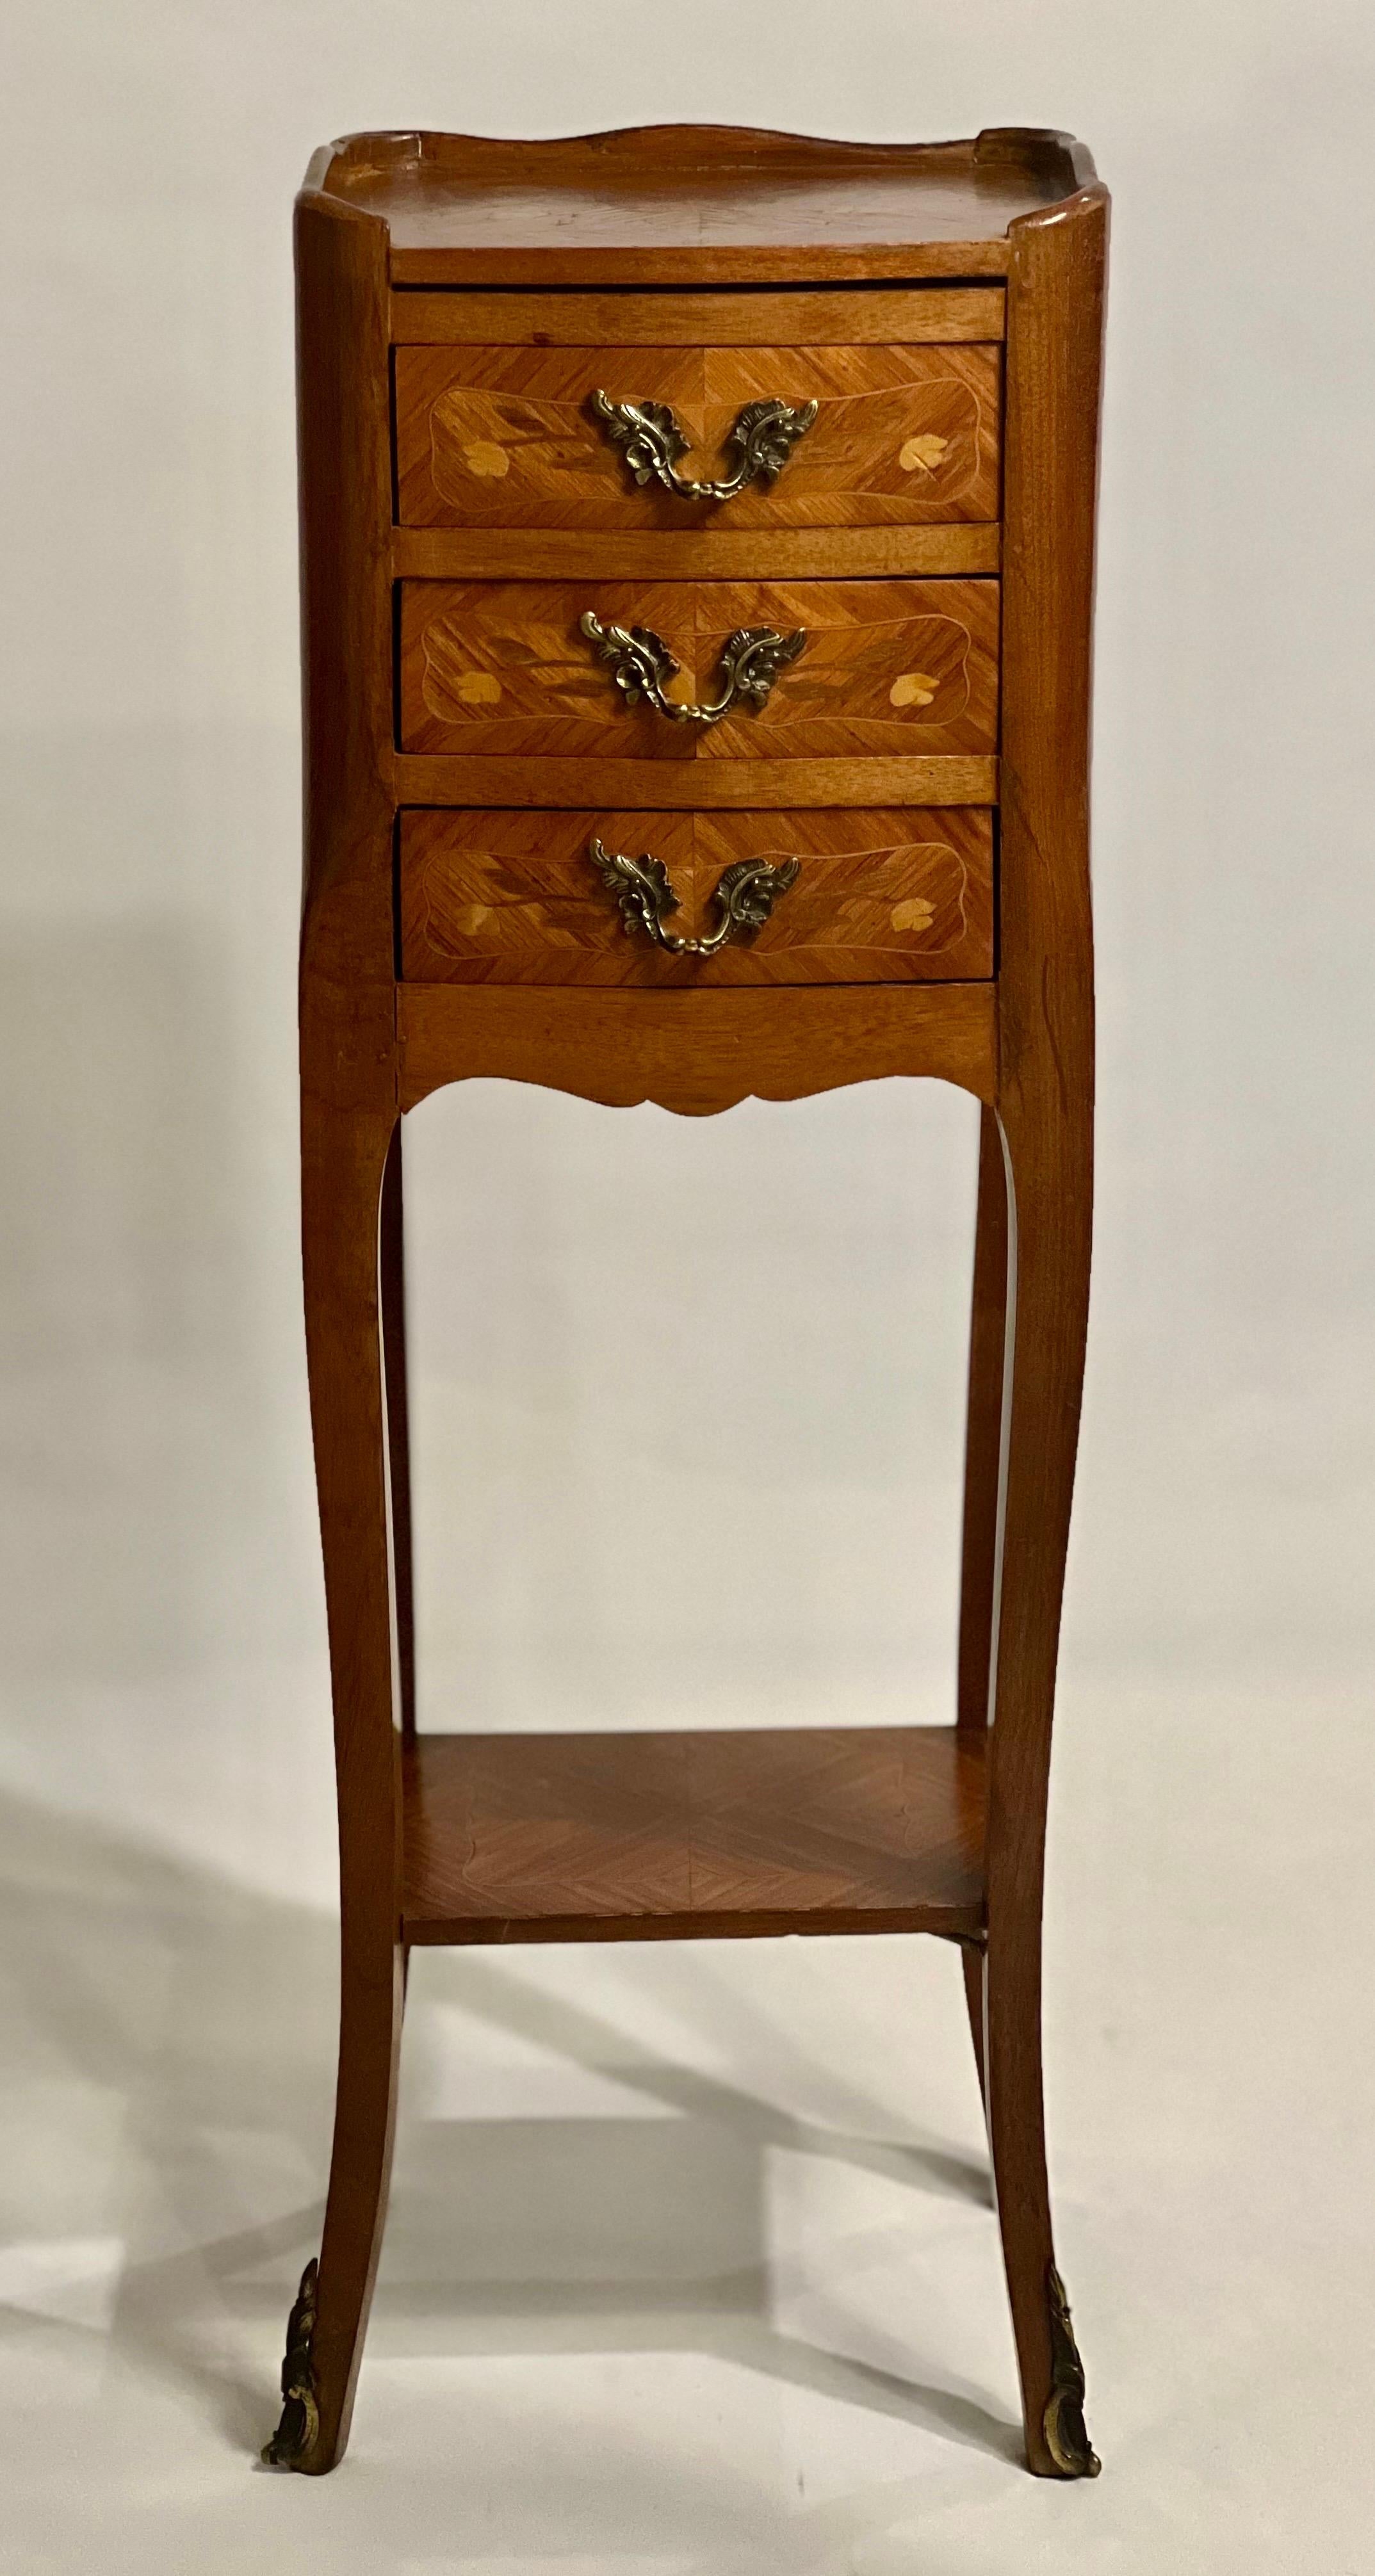 Petite French Louis XV style three-drawer side table or bedside stand, c. early 20th century.

Beautiful stand in tulipwood with marquetry on the top, sides and front. The tray style top and drawers feature a satinwood inlay with floral detail and